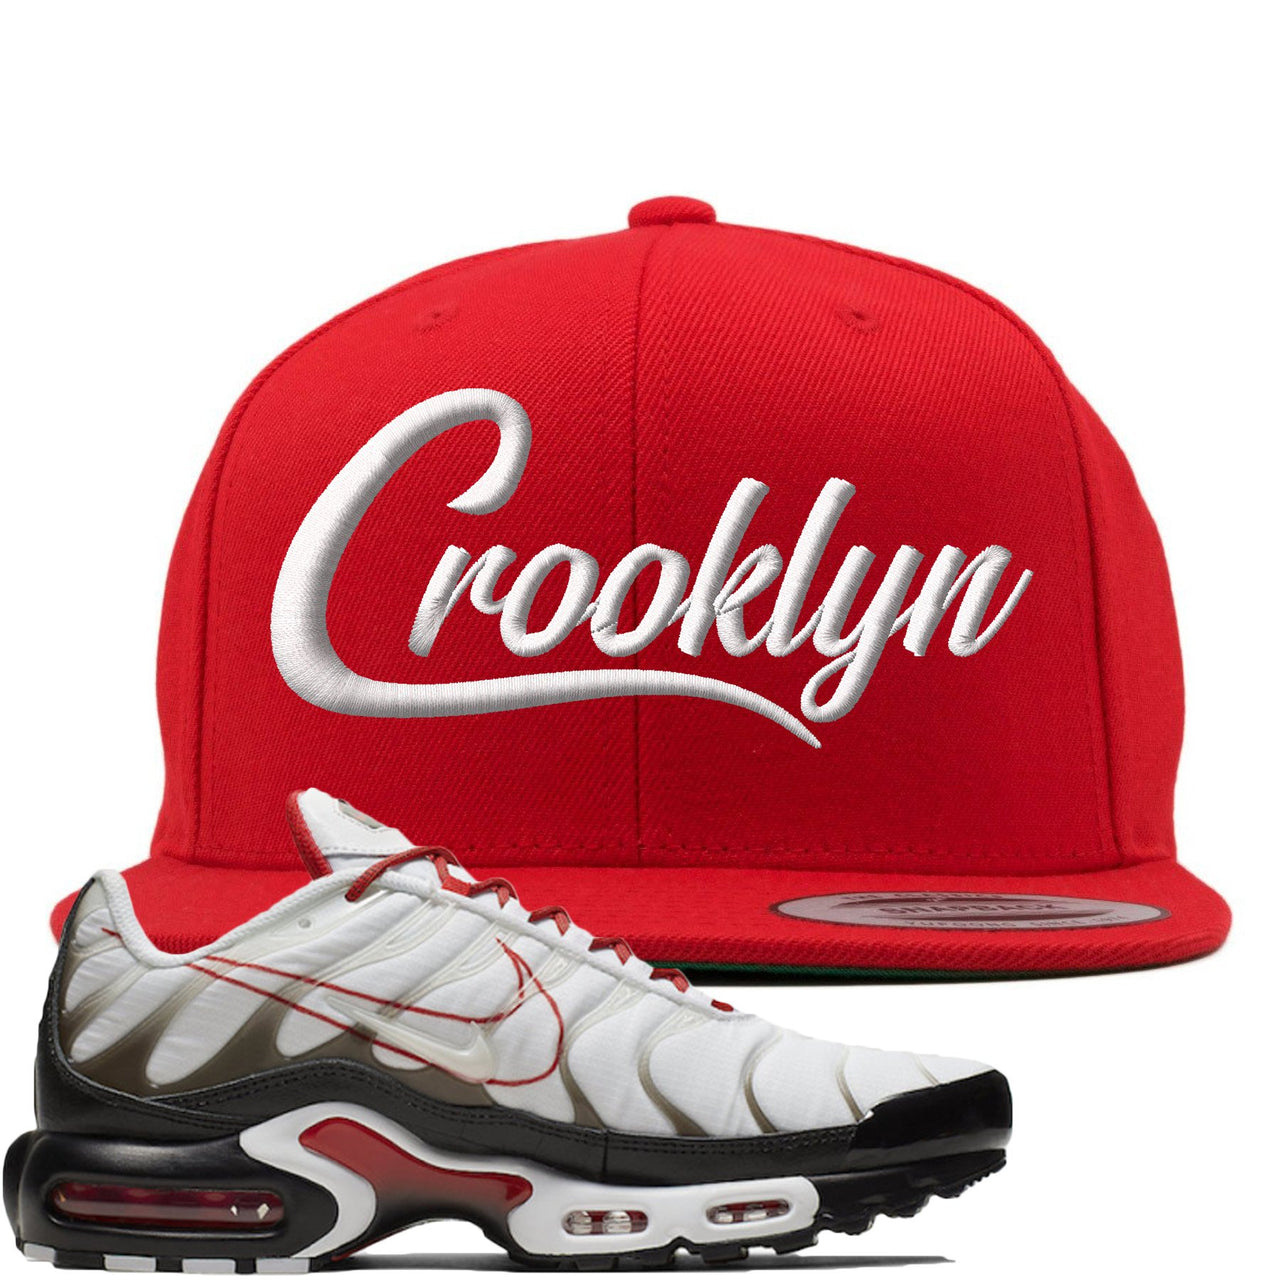 White University Red Pluses Snapback | Crooklyn, Red